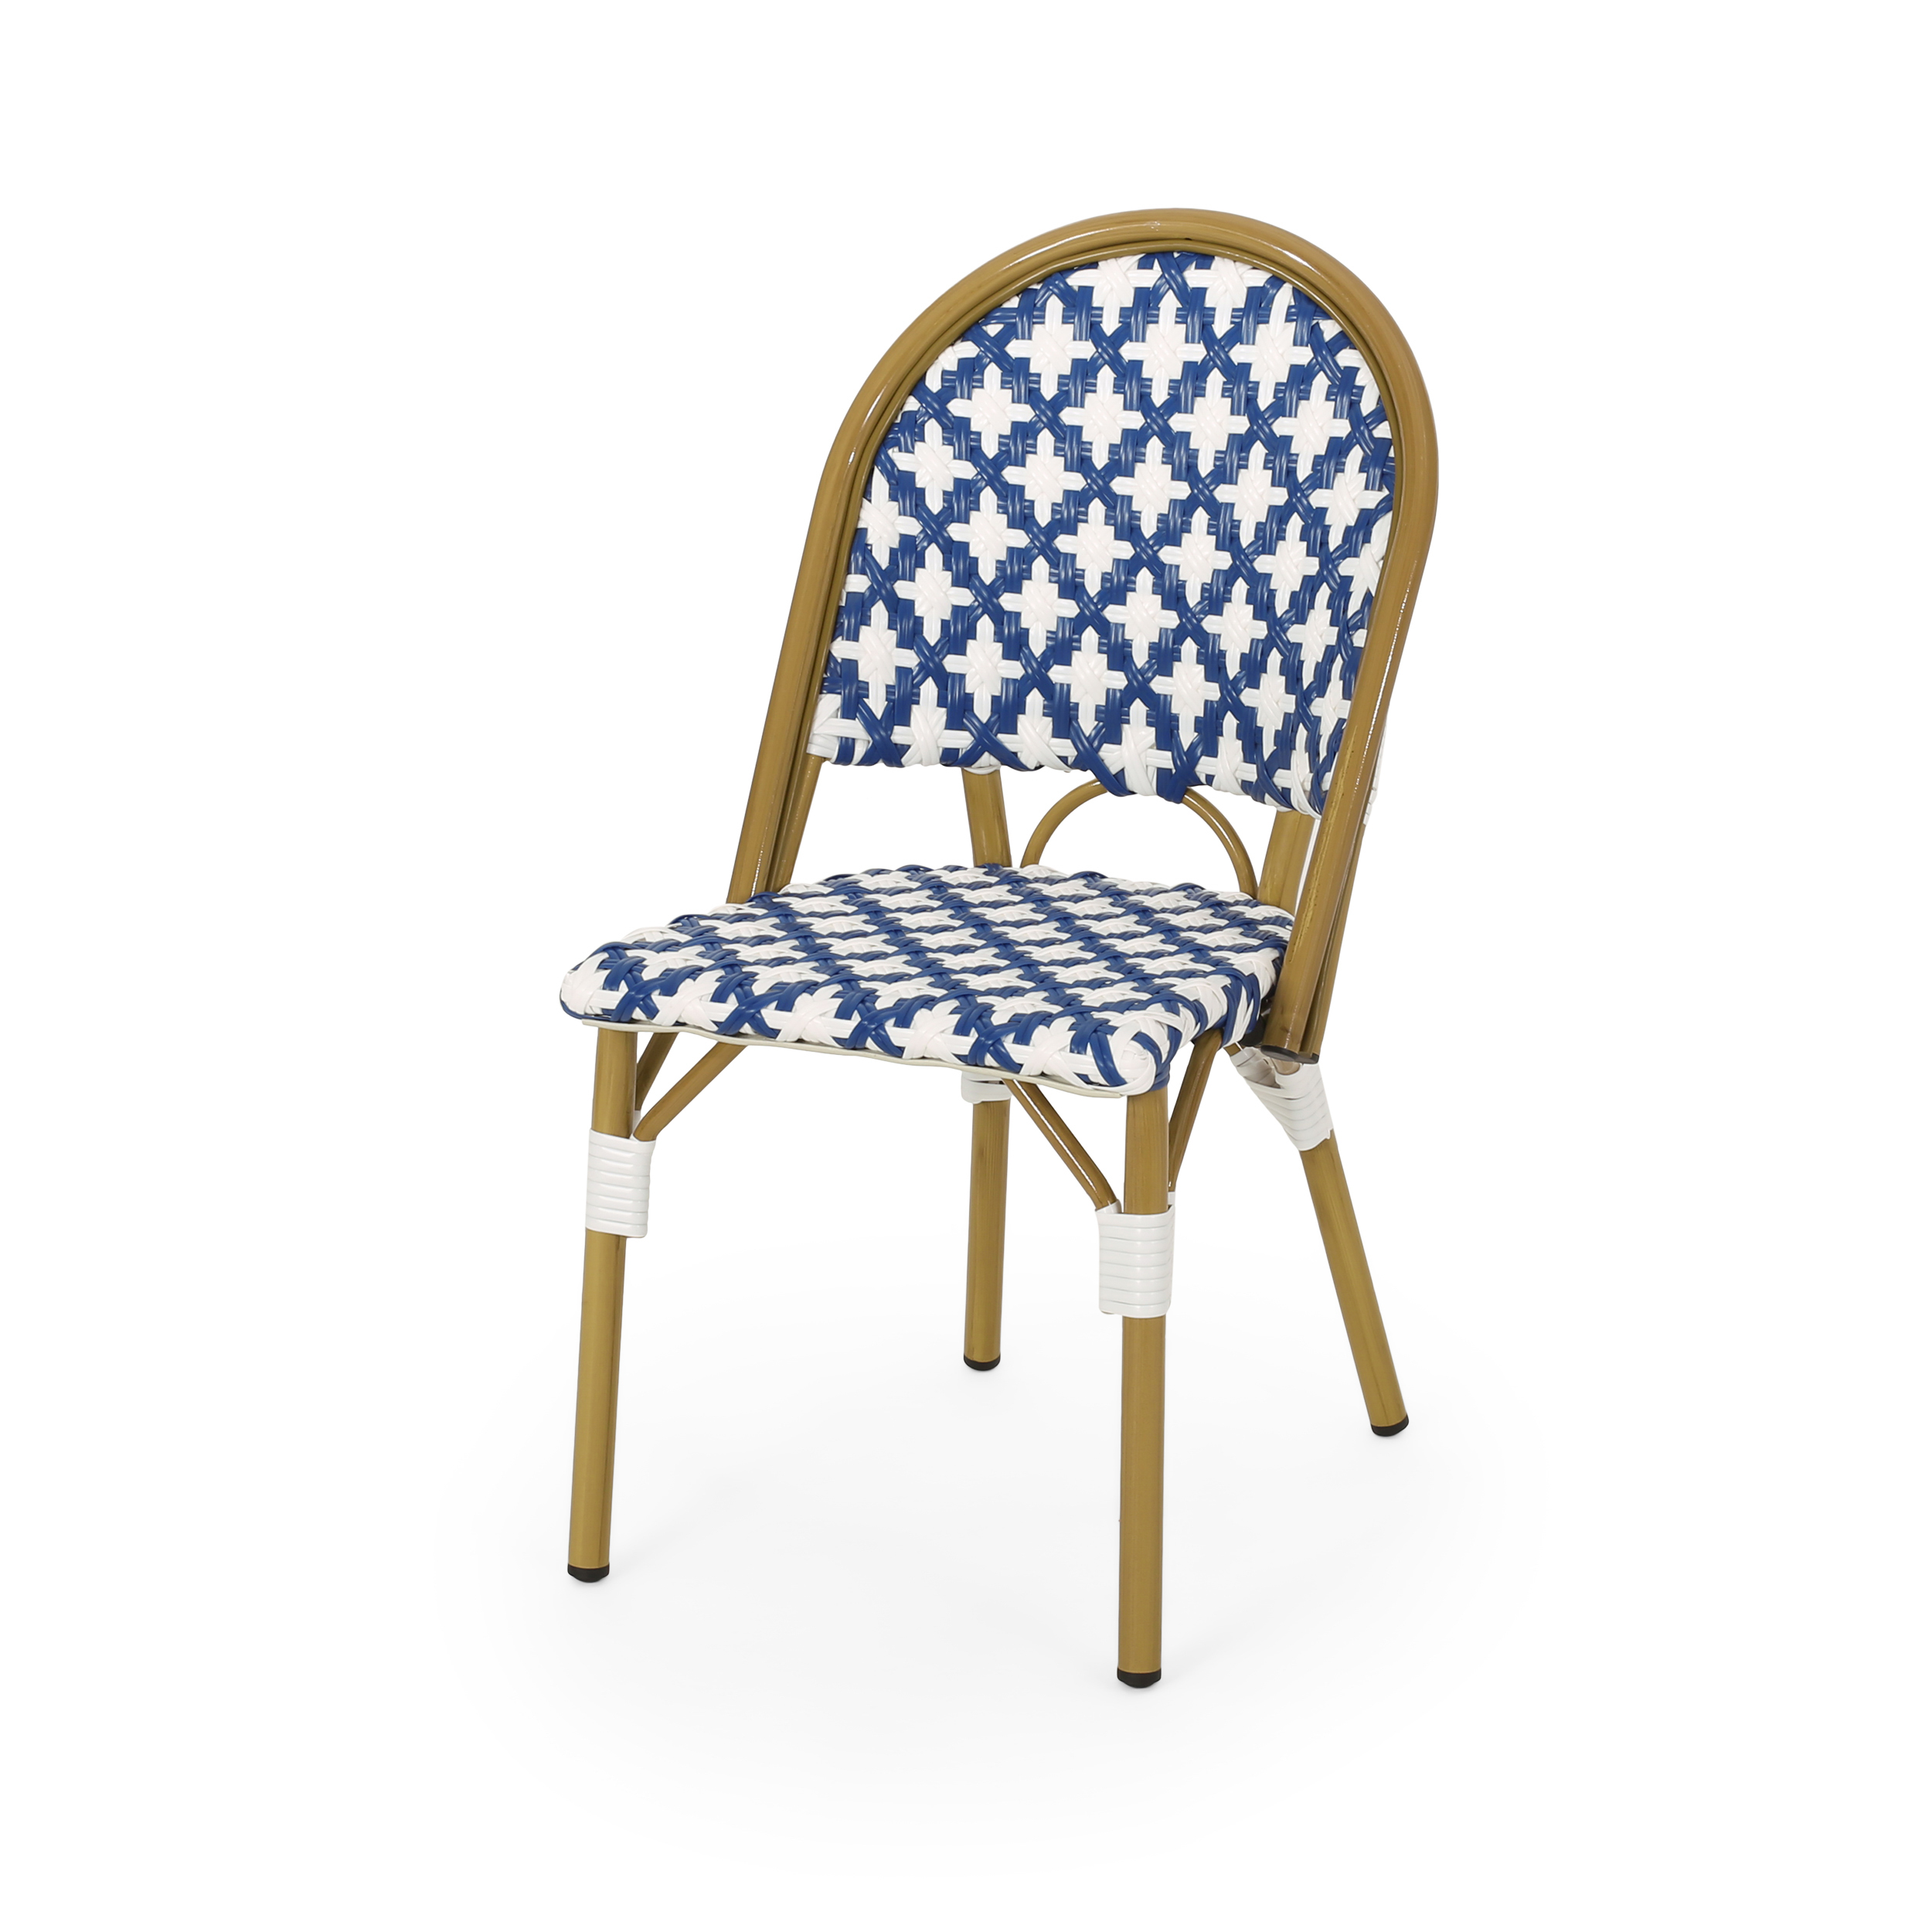 Noble House Louna Aluminum & Faux Rattan Bistro Chairs in Blue/White (Set of 4) - image 3 of 8